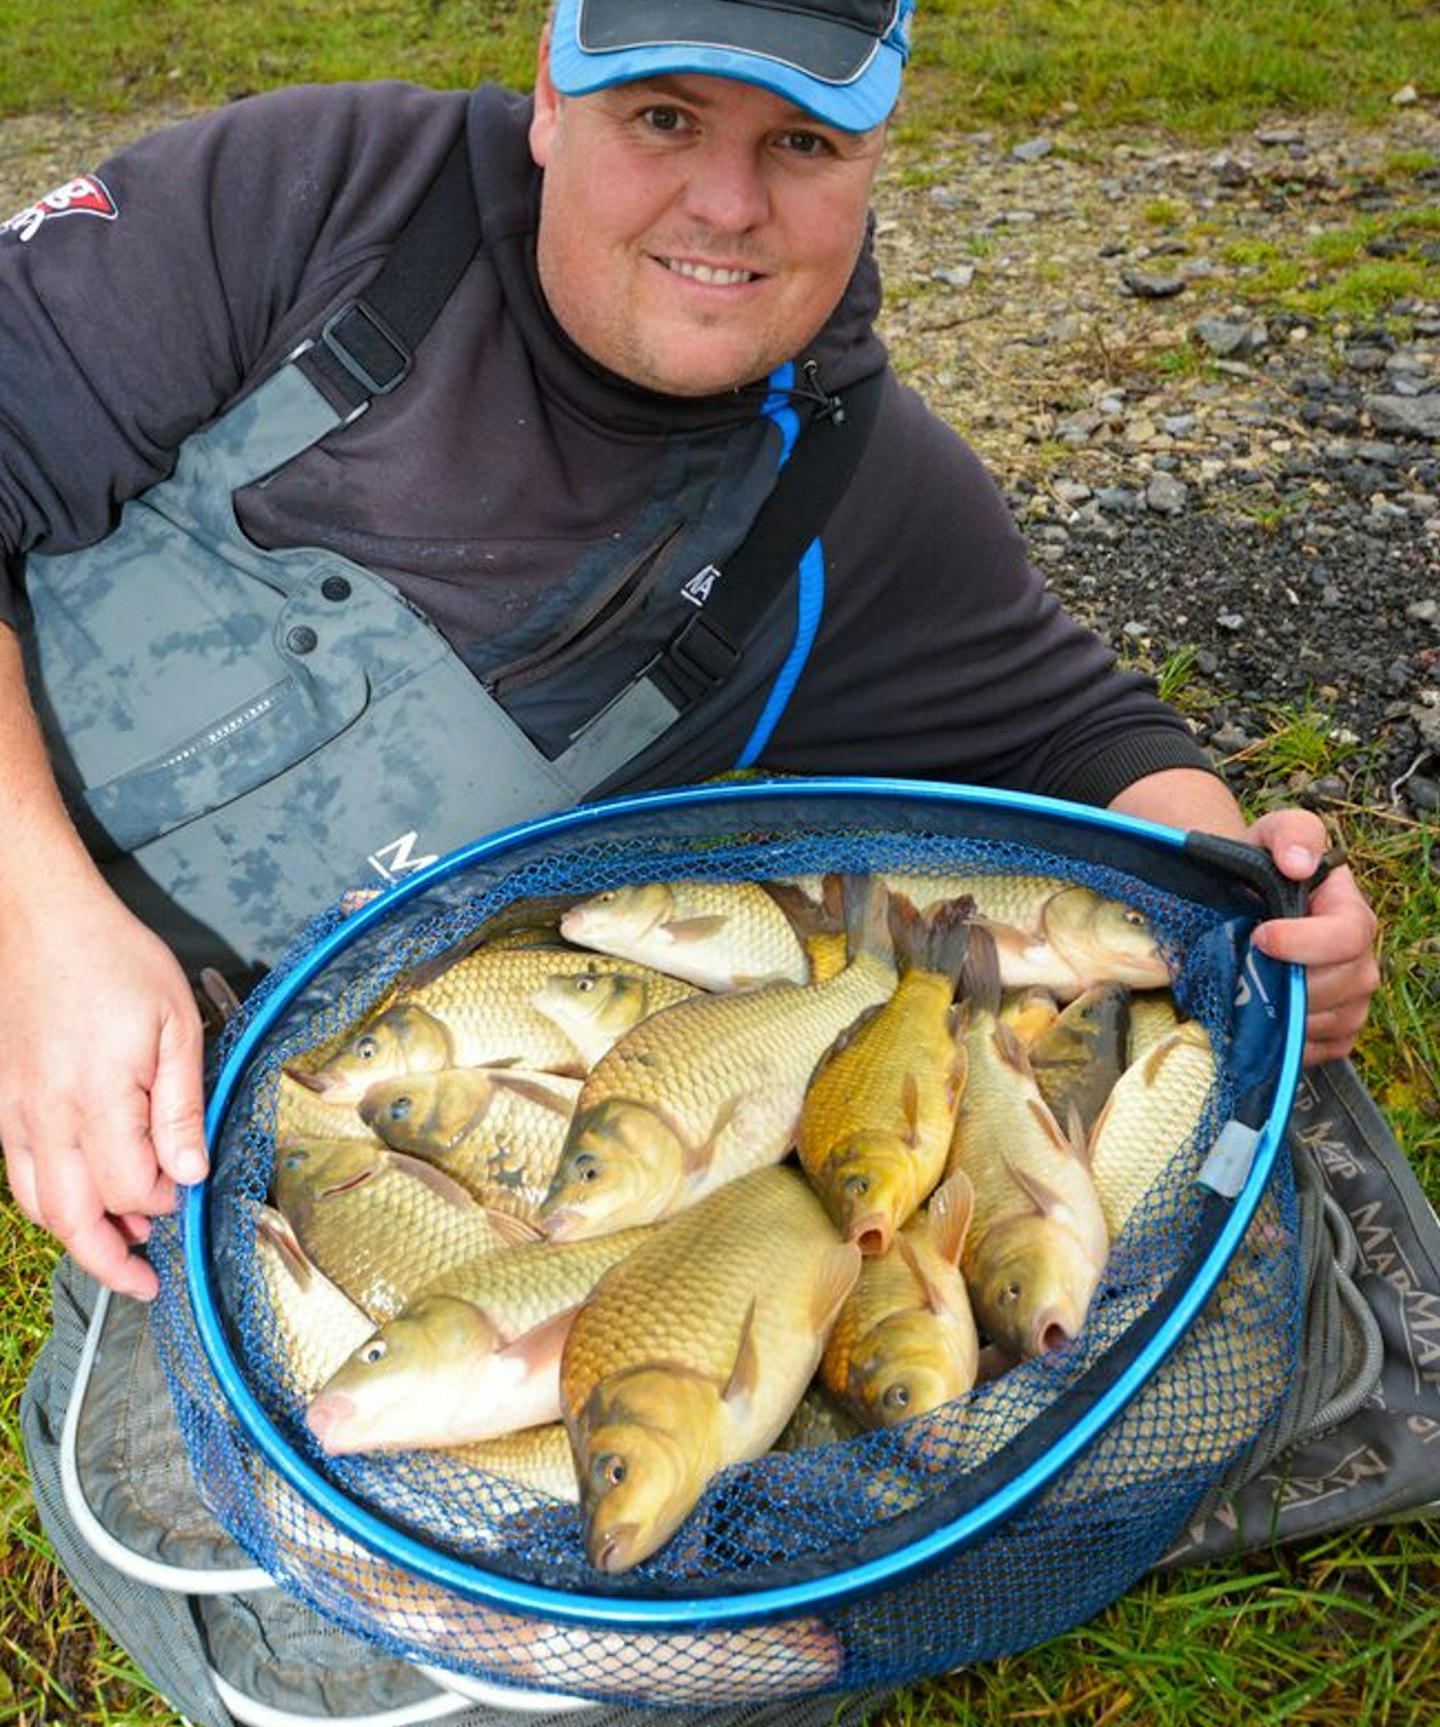 Ditch shallow fishing limits - Jamie Hughes 